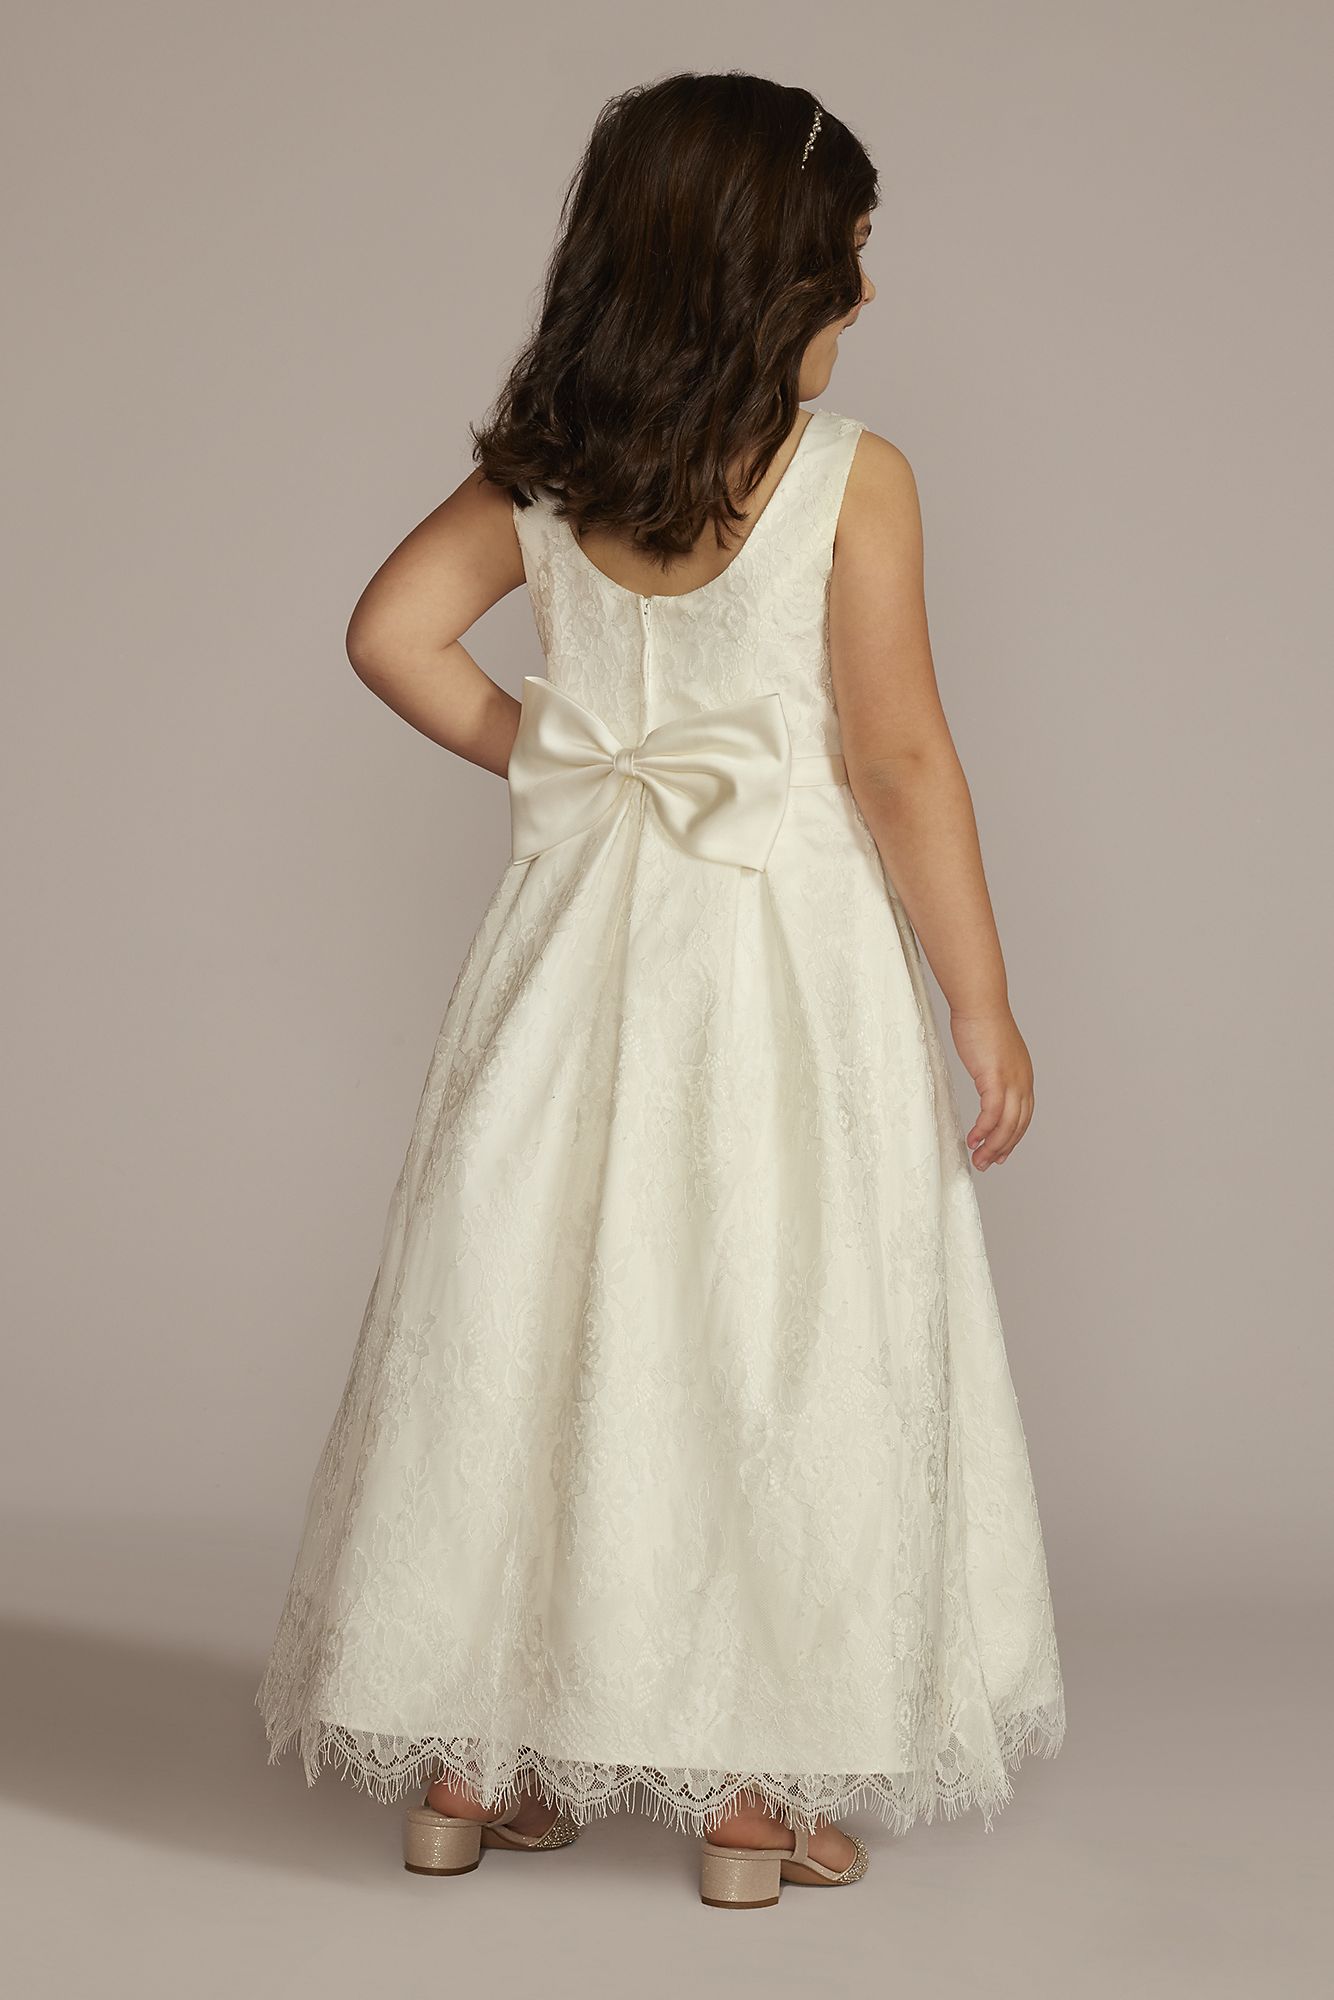 Lace and Satin Ball Gown Flower Girl Dress DB Studio WG1445